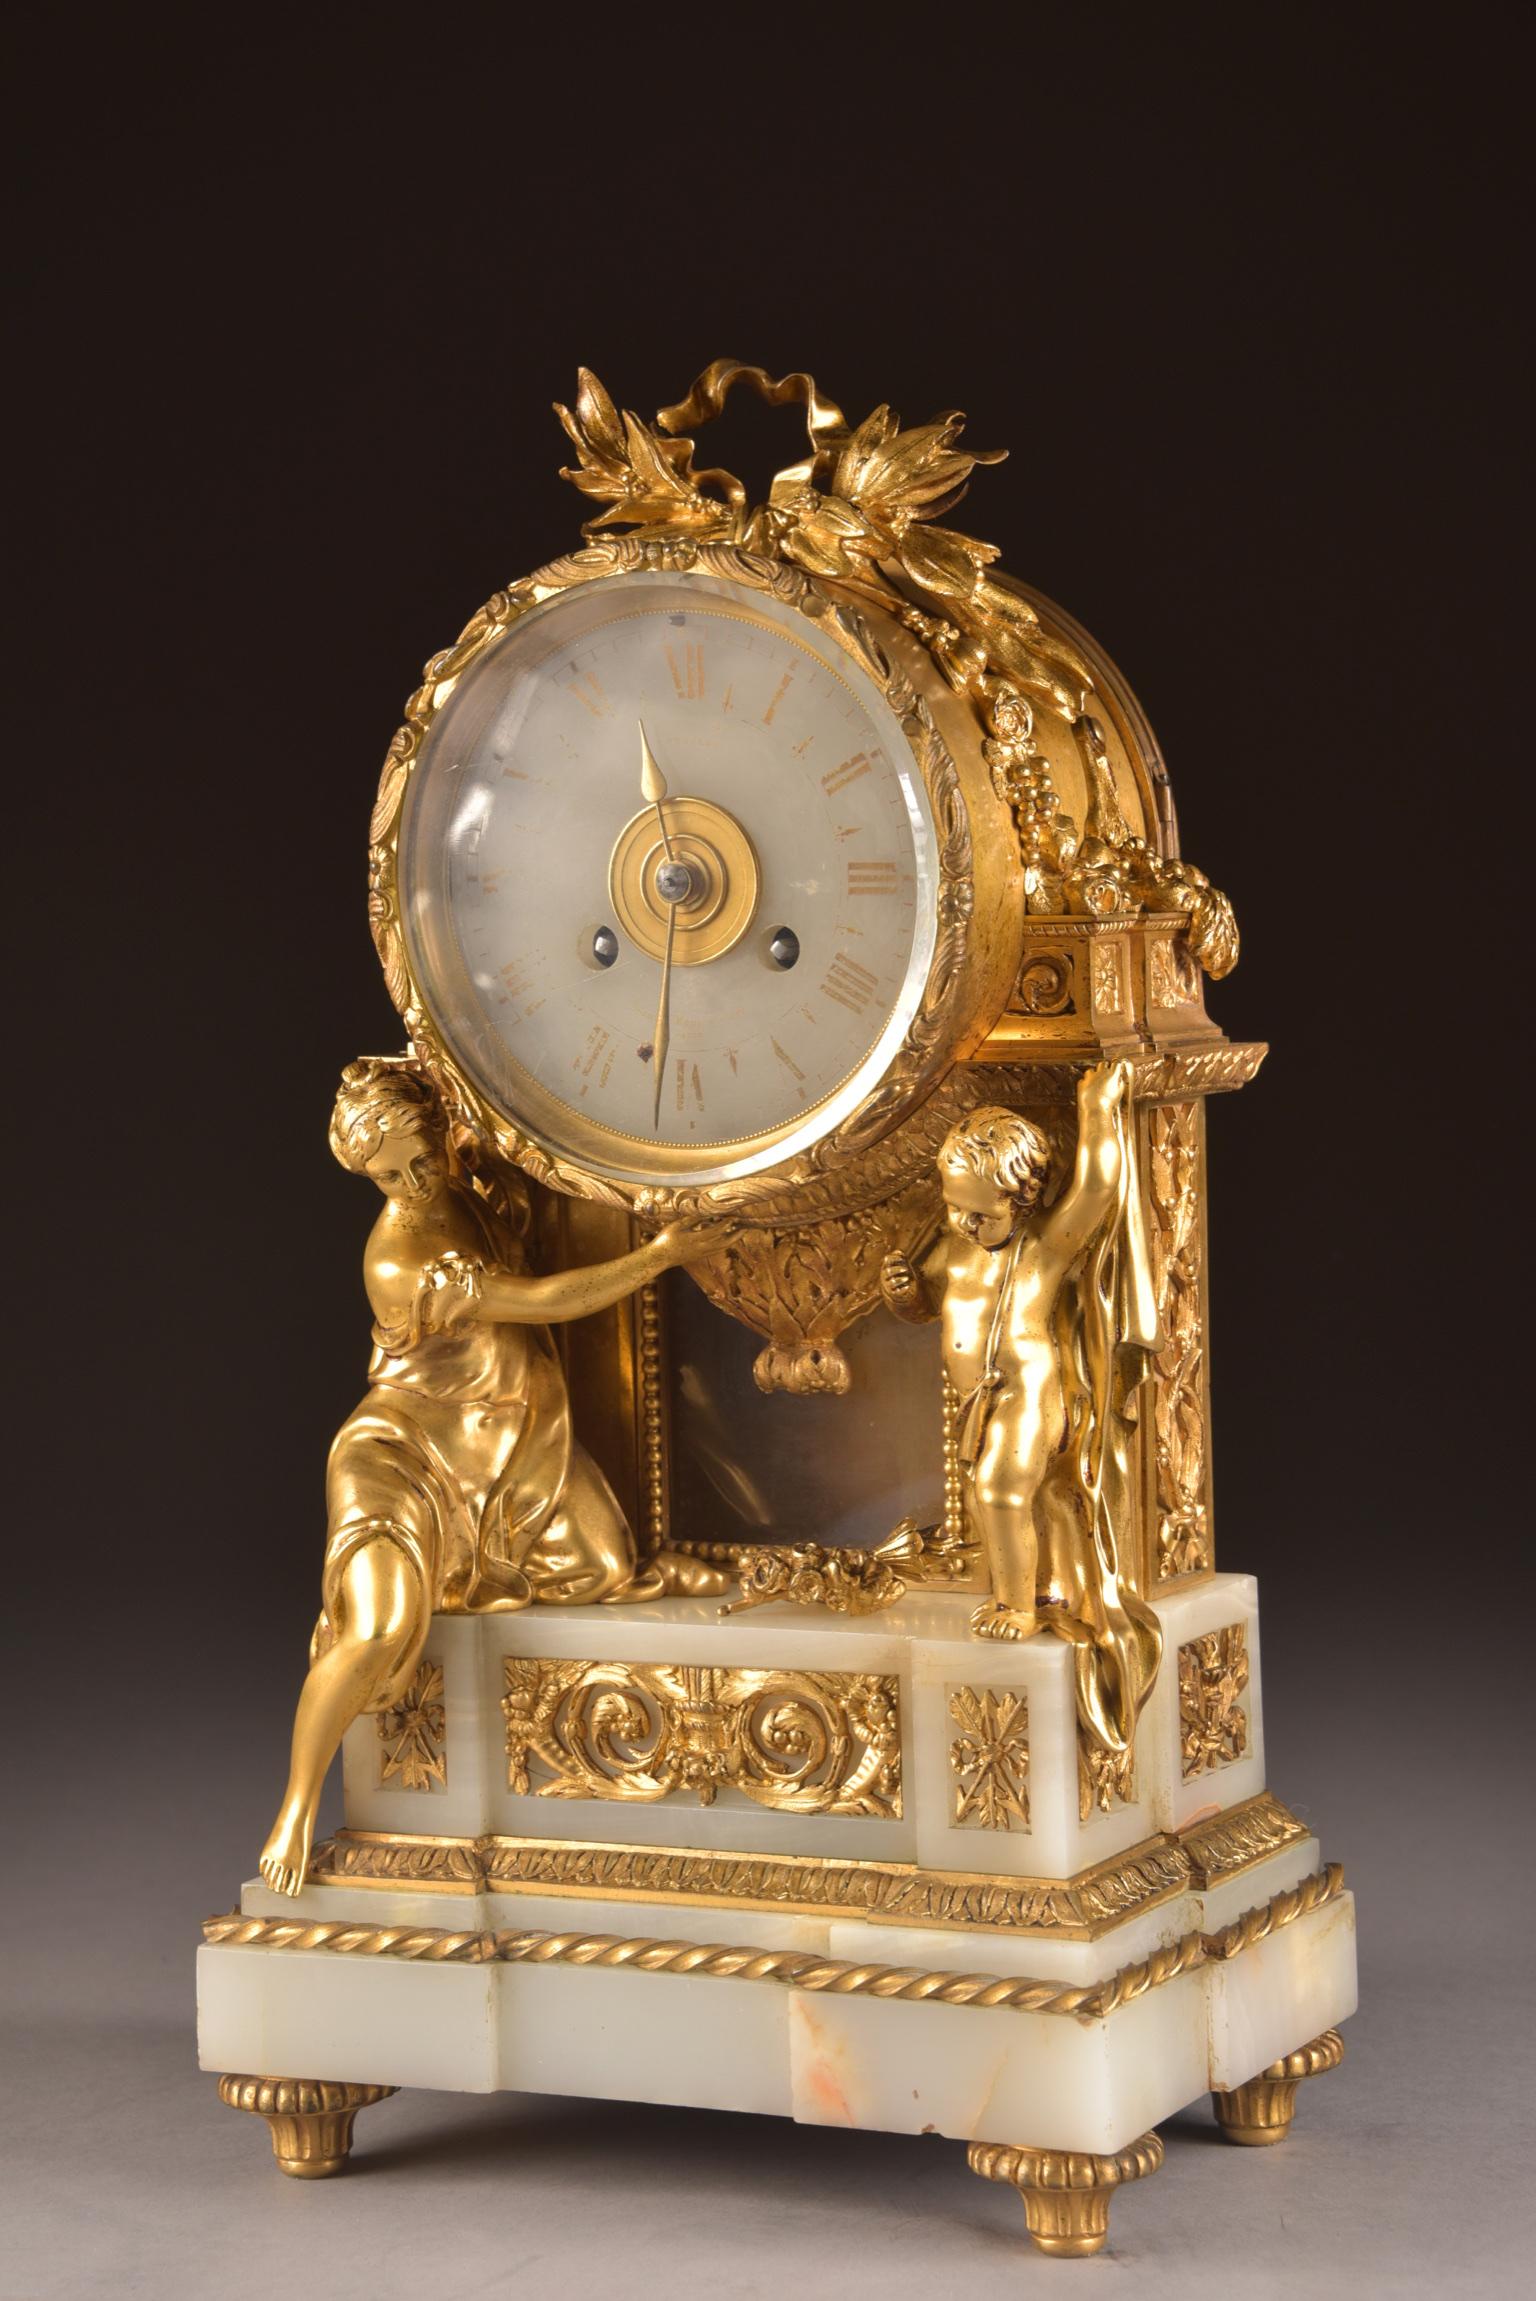 Spectacular French clock with very detailed image of a clock-bearing woman and cherub.

This clock works well and it comes with a pendulum and key.

Registered shipping!